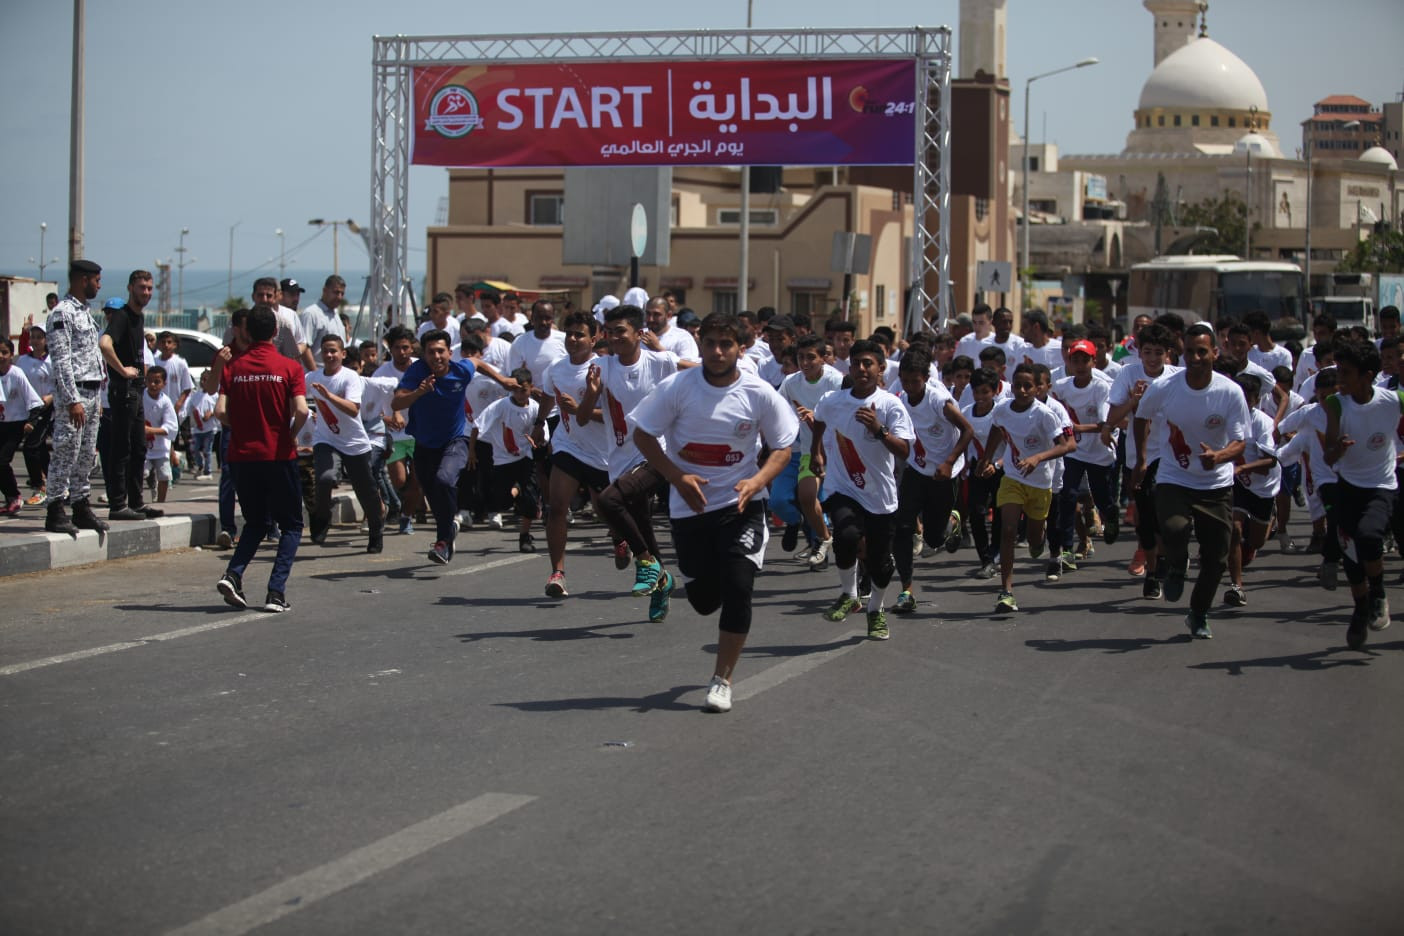 Around 400 Gaza residents take their turn over the mile distance as part of IAAF Run 24-1 initiative